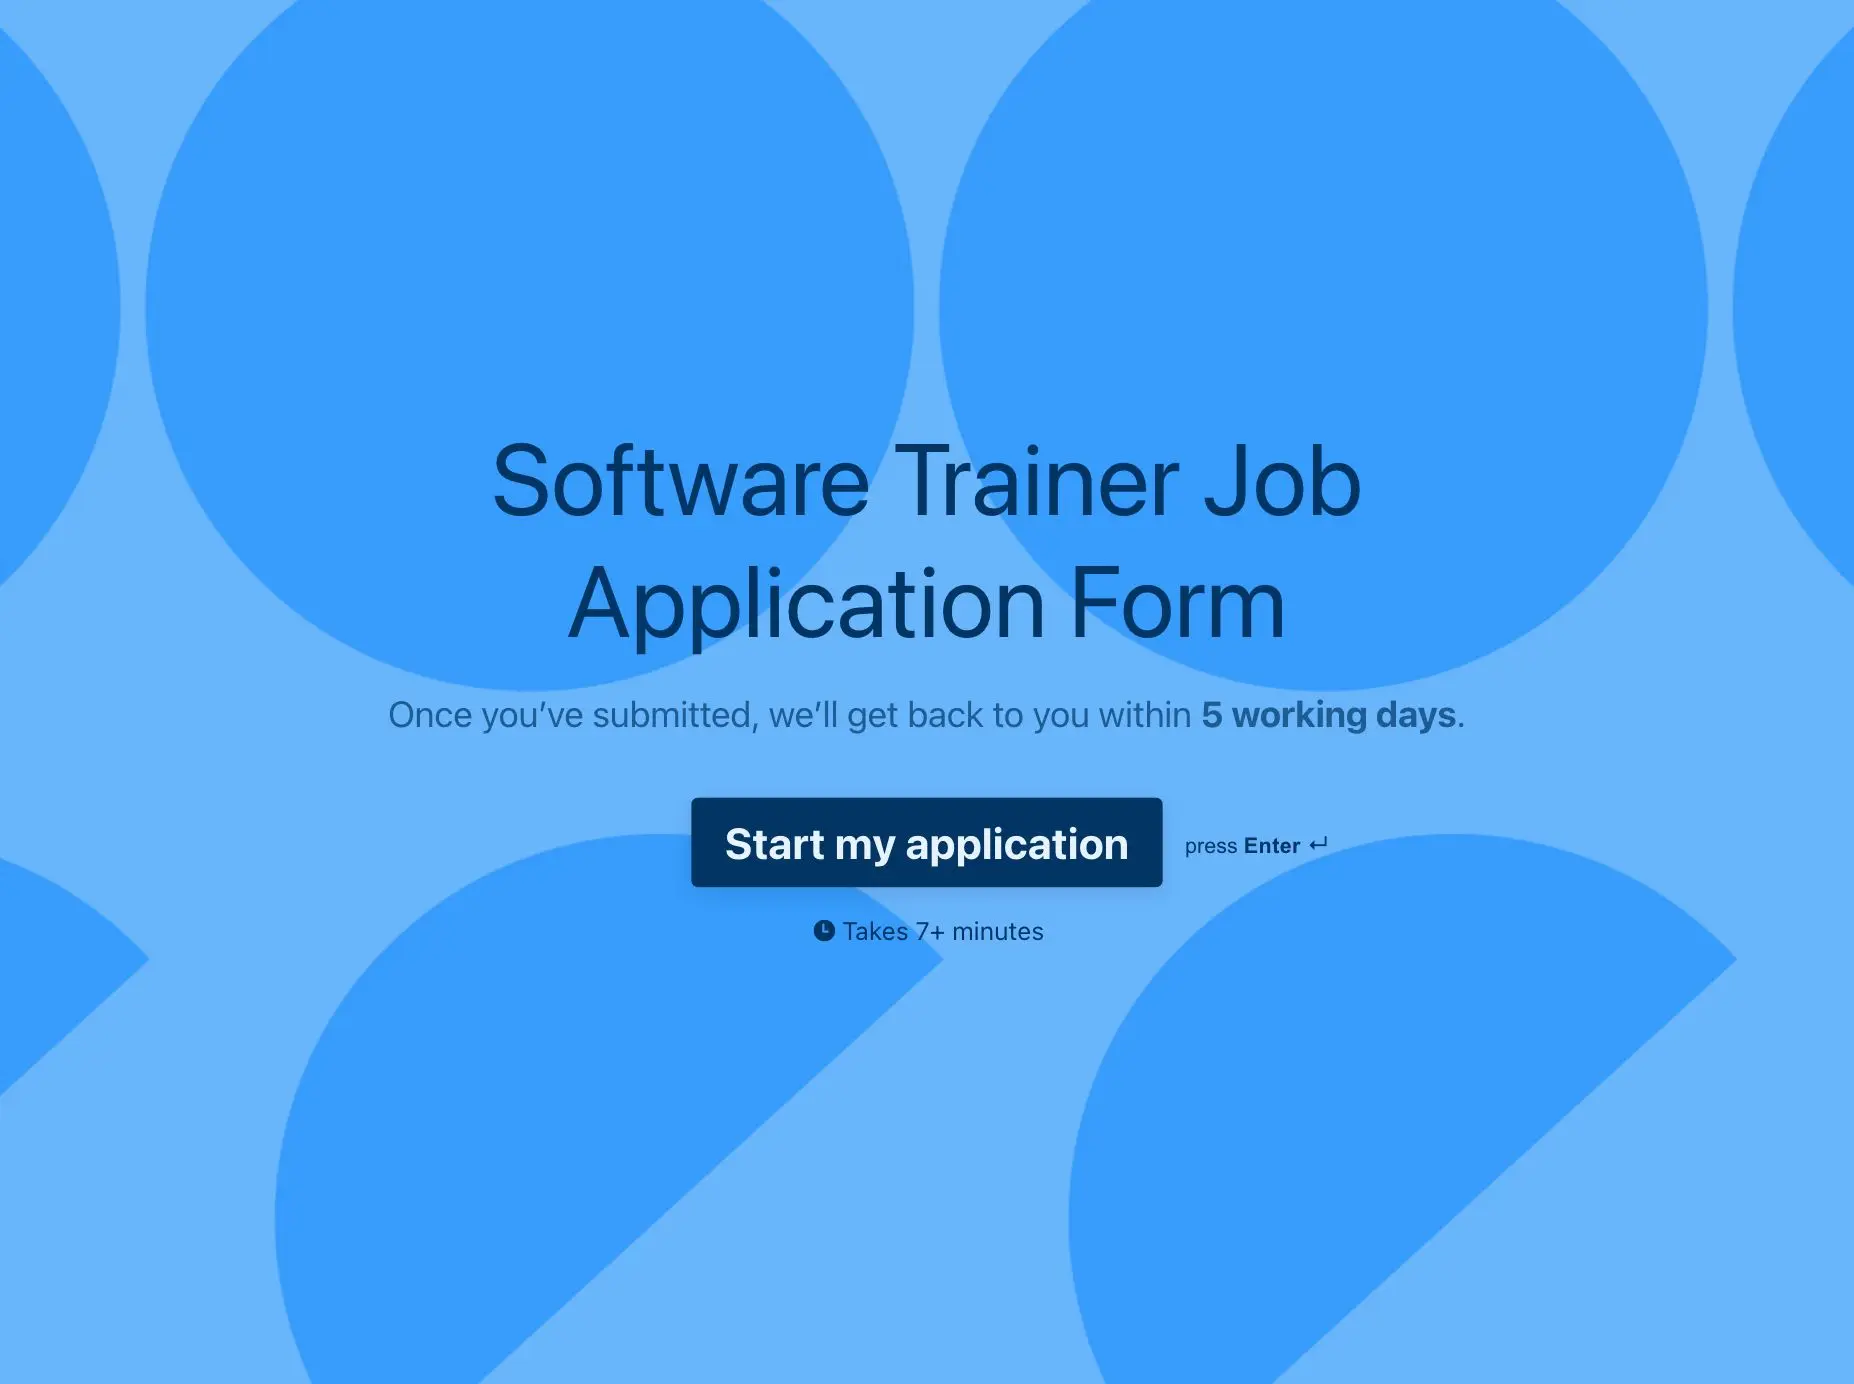 Software Trainer Job Application Form Template Hero